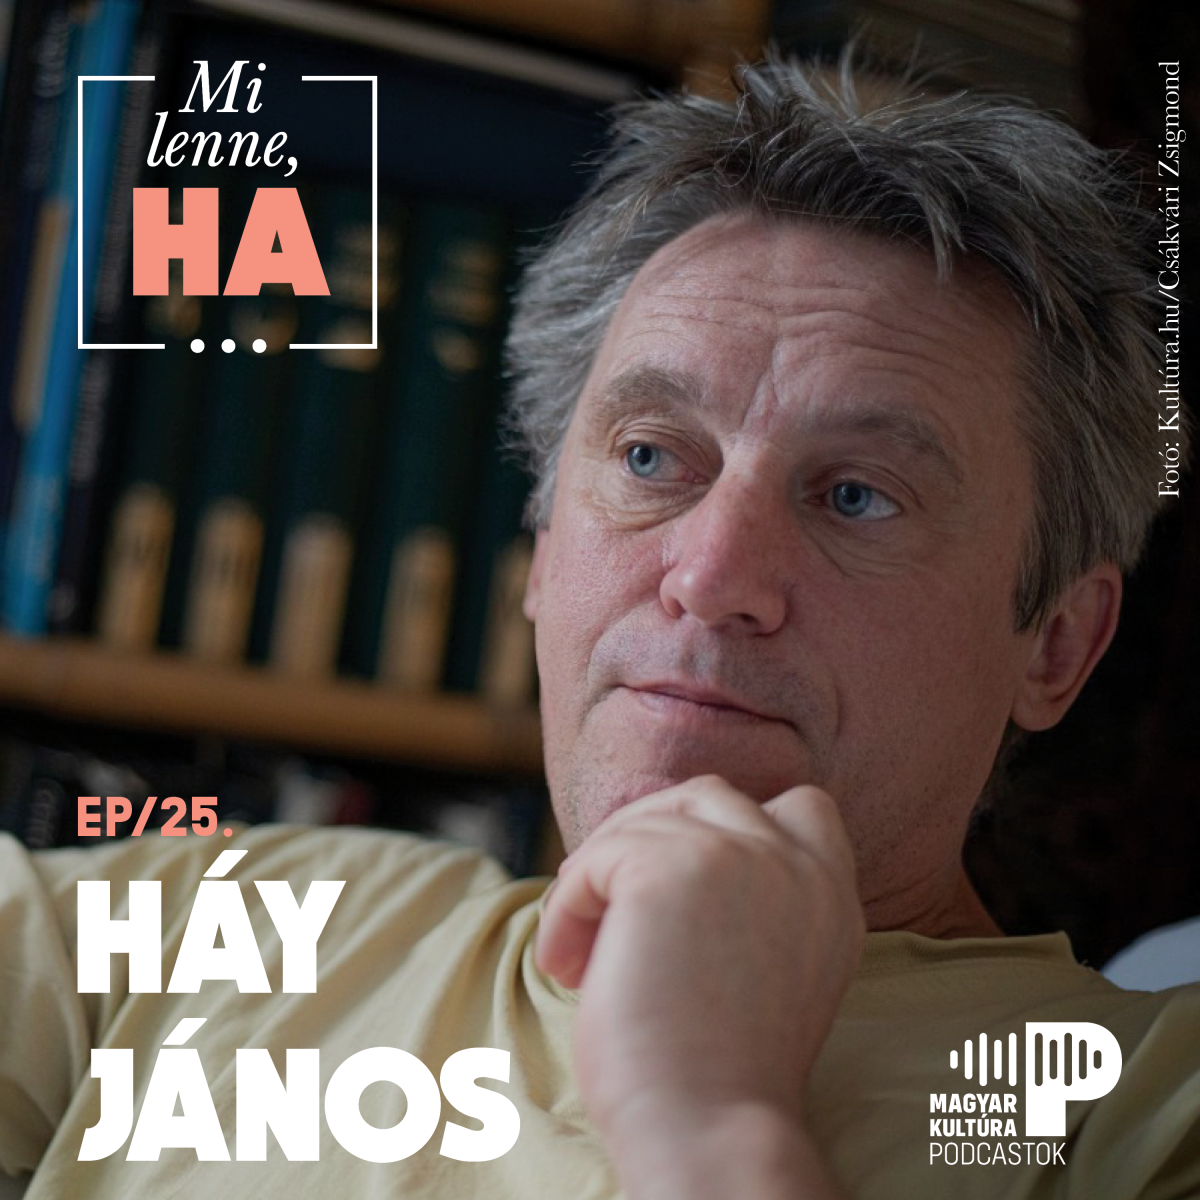 mi_lenne_ha_hay_janos_spotify_cover_3000x3000 (1).png